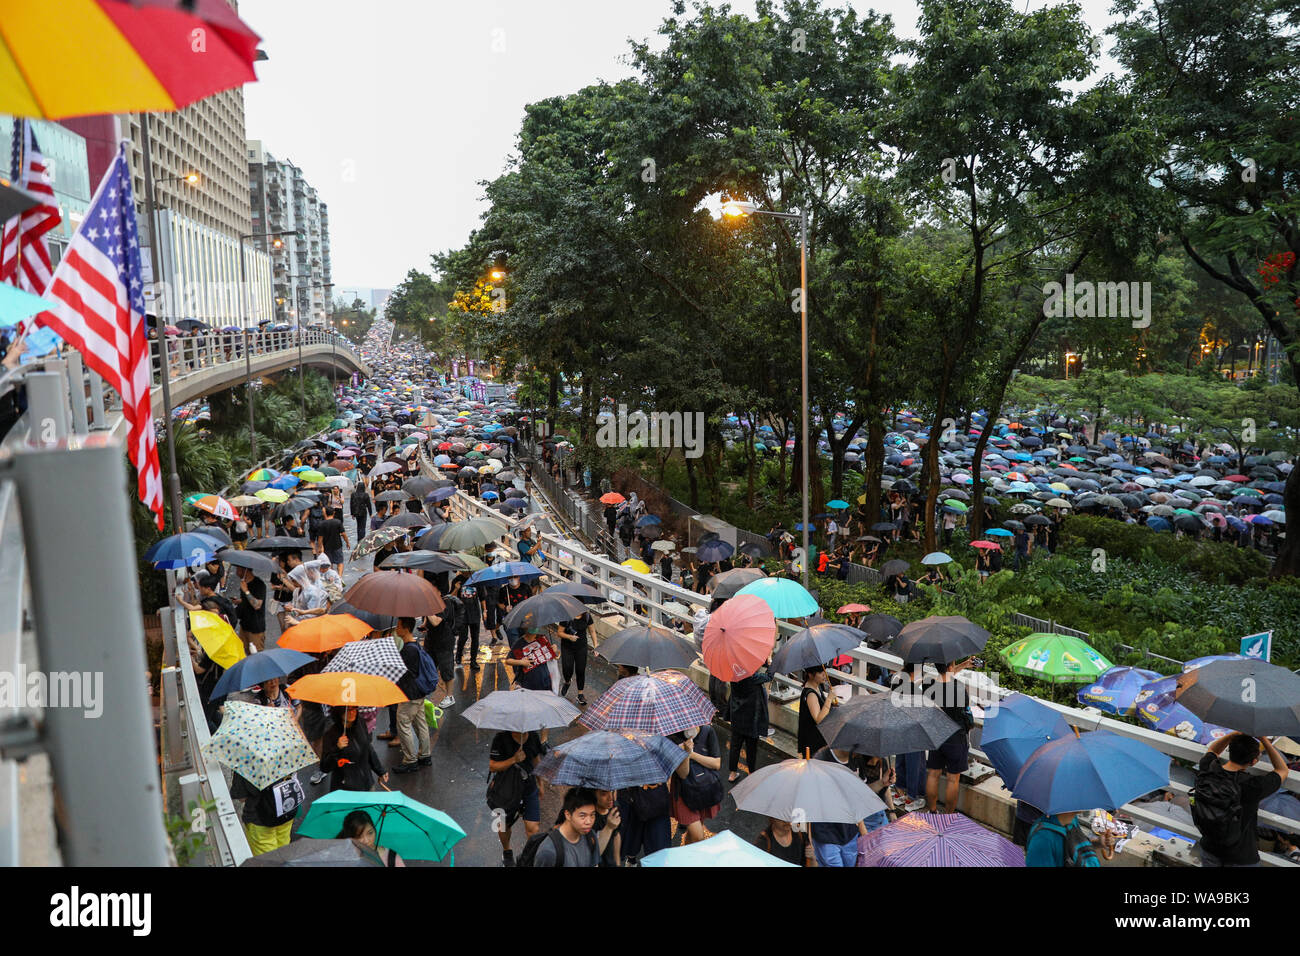 Hong Kong. 18th Aug, 2000. Huge number of protesters holding umbrellas on an unauthorized march during heavy rain when marching from Victoria Park where a rally organised by the Civil Human Rights Front was being held which organizers claim more than 1.7 million people attended.  Some protesters held flags from the USA. 18th August 2019 Credit: David Coulson/Alamy Live News Stock Photo